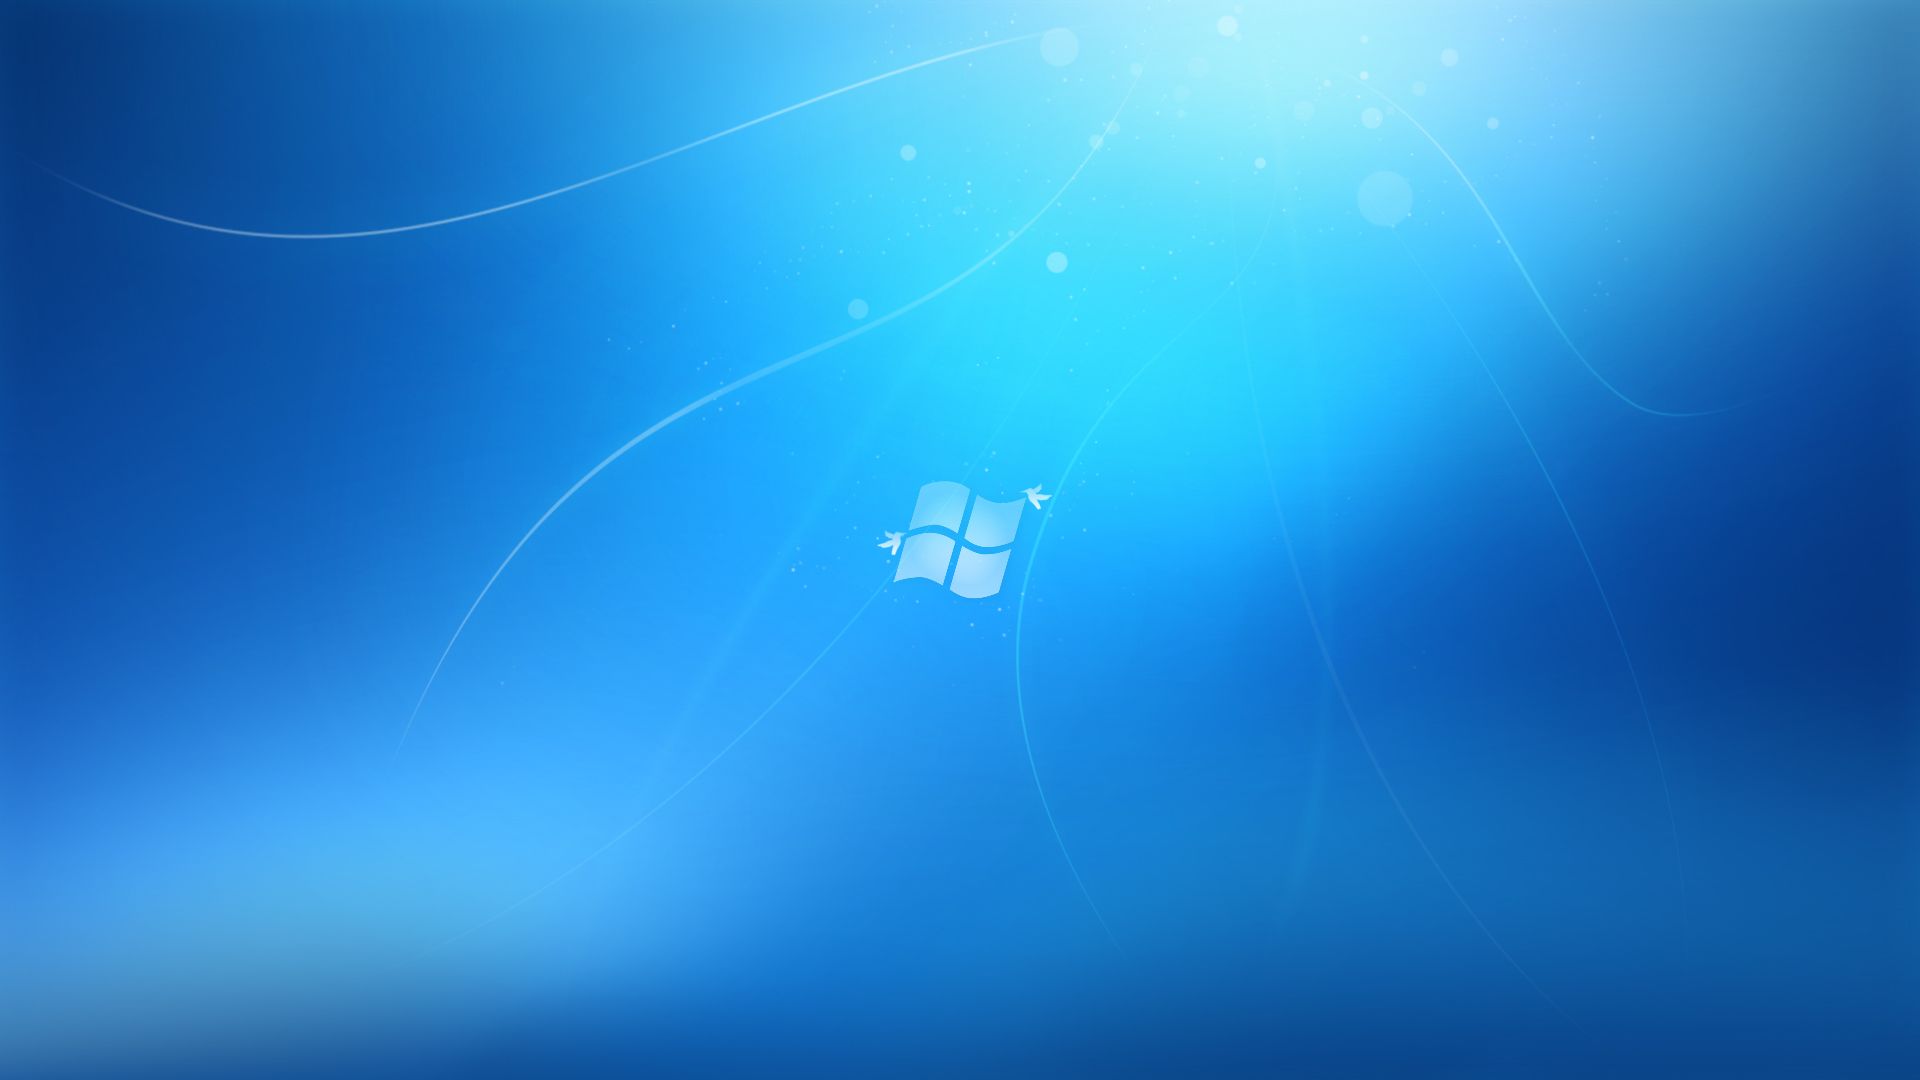 Windows 7 HD Wallpaper | Windows 7 Images Free | Cool Wallpapers